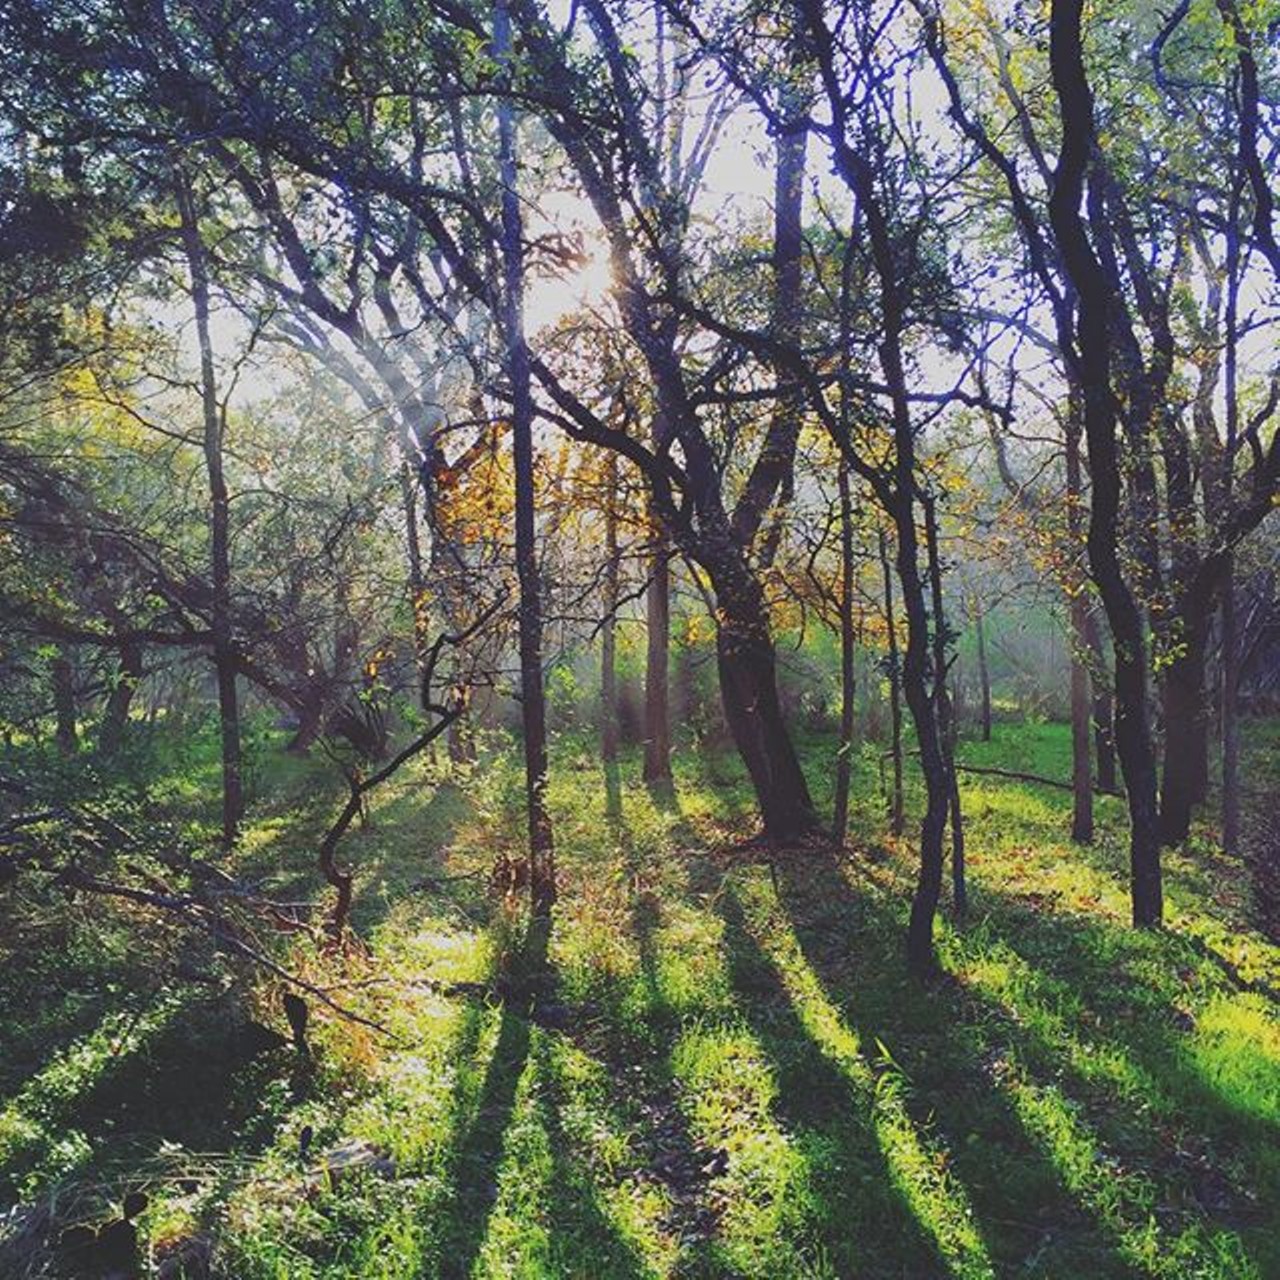 McAllister Park
If you&#146;re looking to stay in San Antonio to get your hike on, McAllister Park is a 6.5-mile loop that has a number of trails and welcomes dogs on leashes. 
http://bit.ly/1QTyJur
Photo via Ben.Mclovin/Instagram